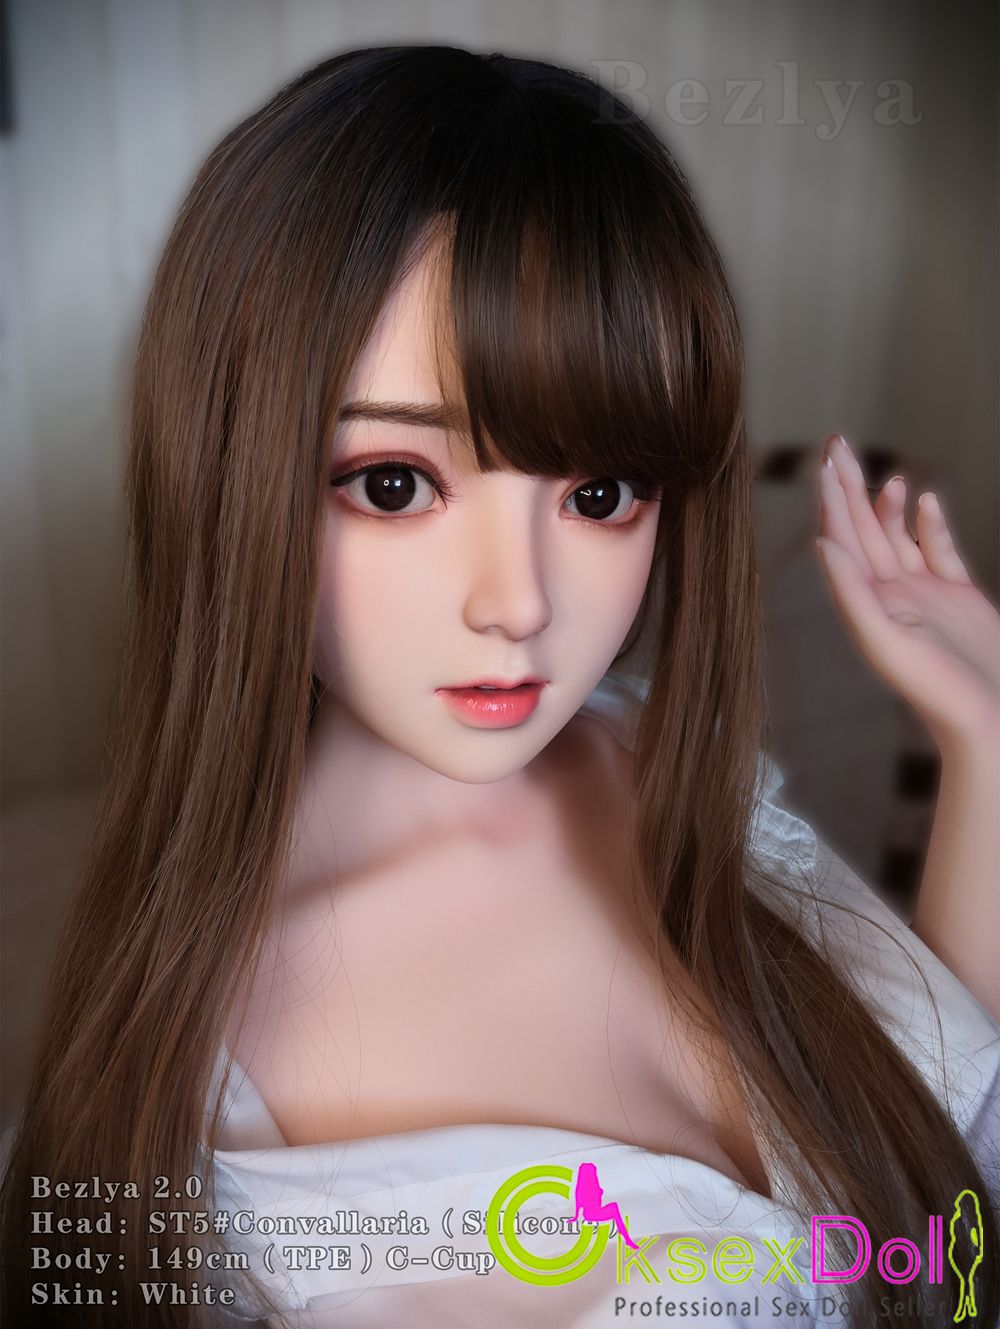 Busty Tits real doll Photos